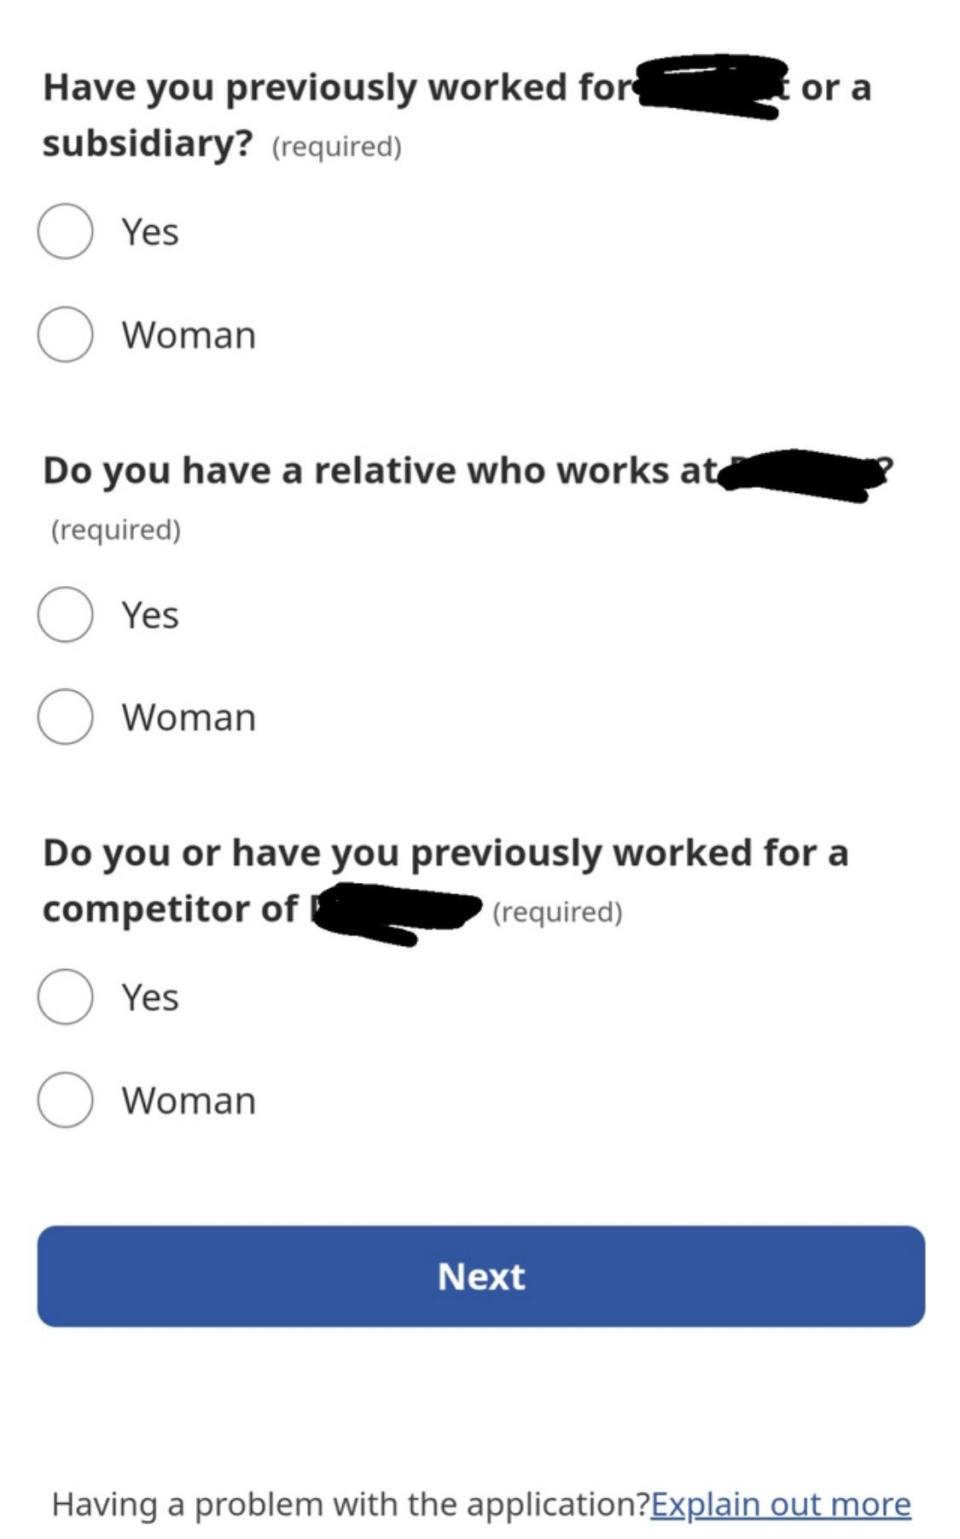 "Yes" and "Woman"